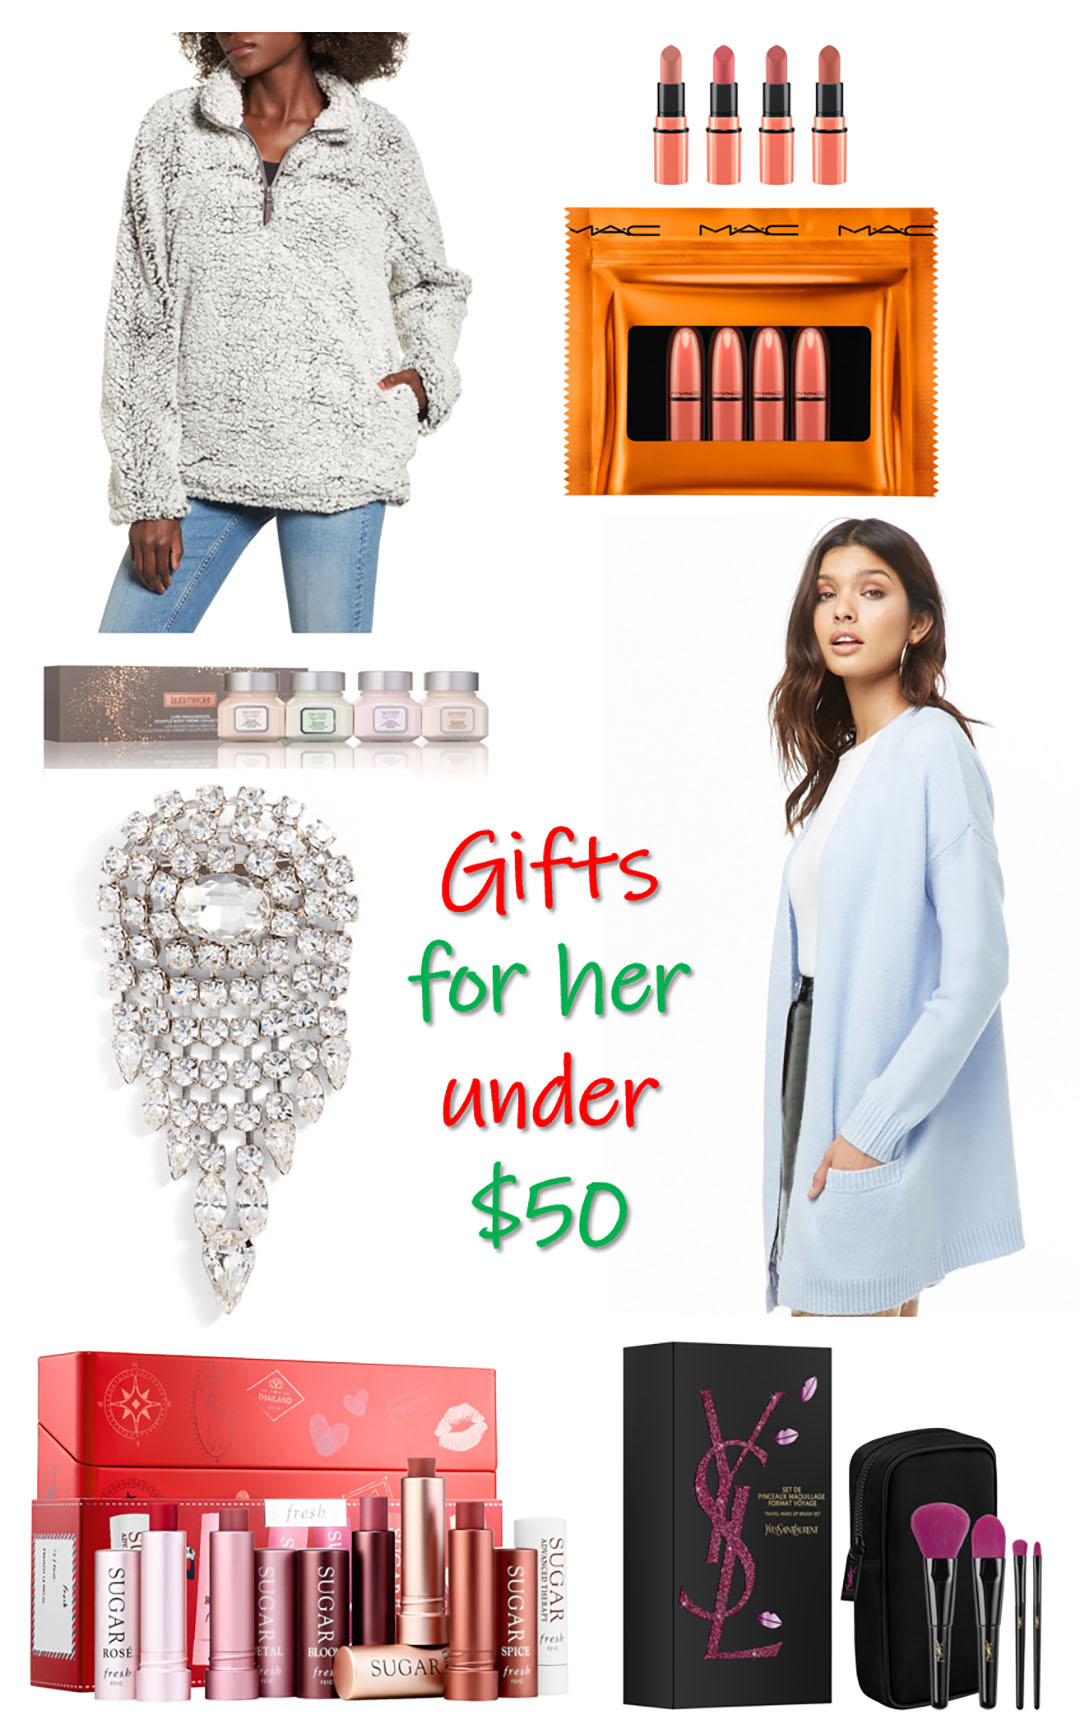 2018 Women's Holiday Gift Guide - Gift Guide for Her